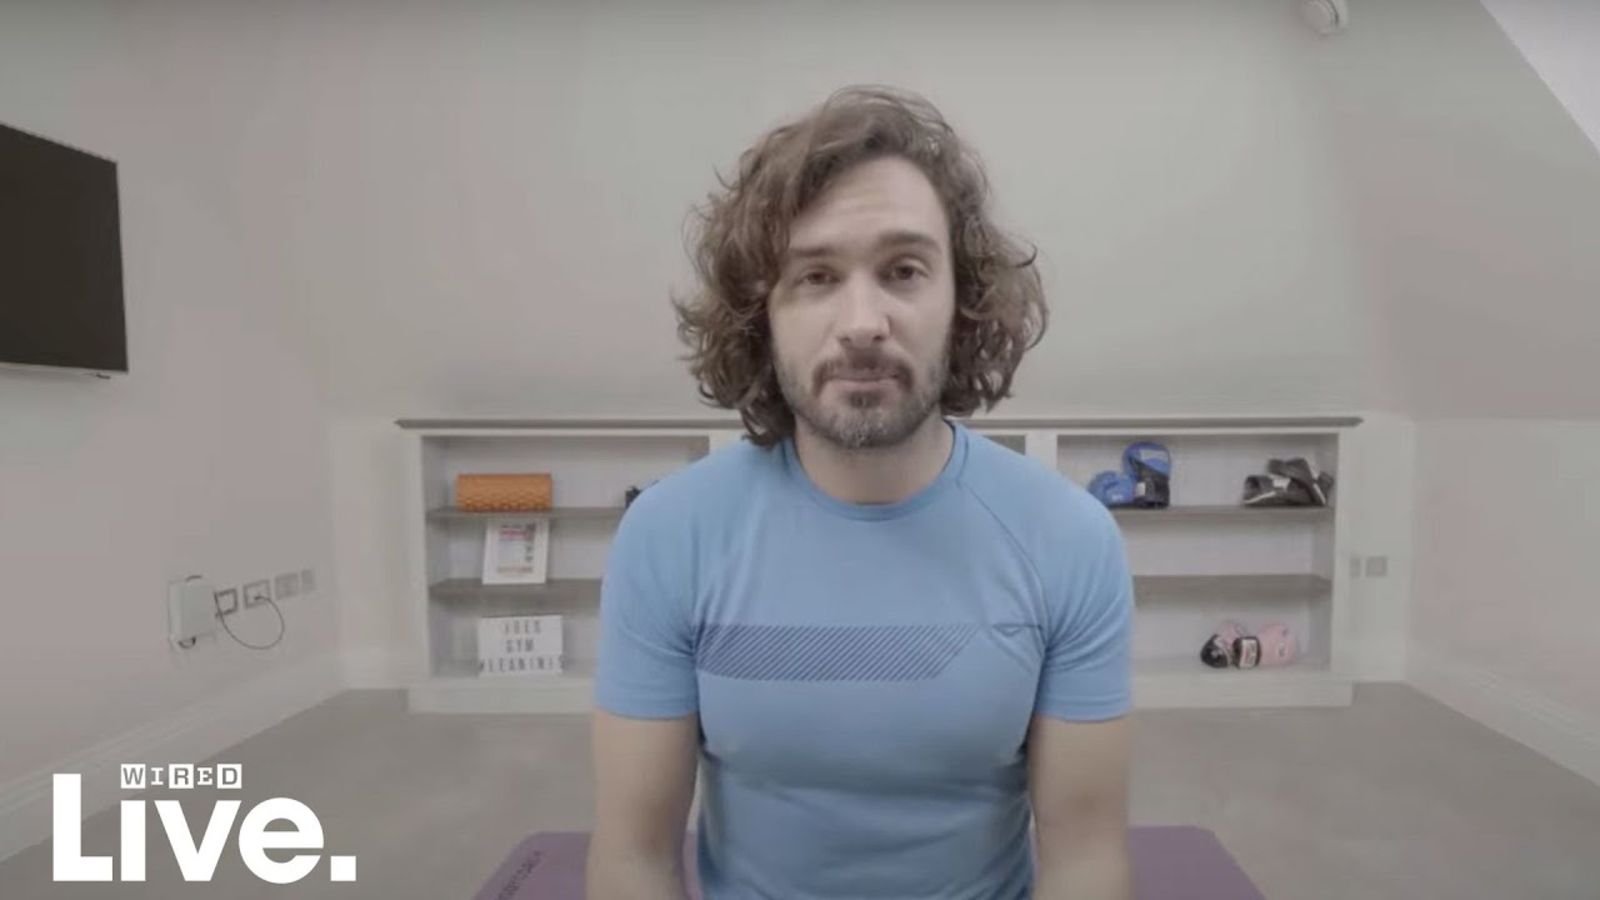 Creating healthy connections during Covid-19 with Joe Wicks | WIRED Live